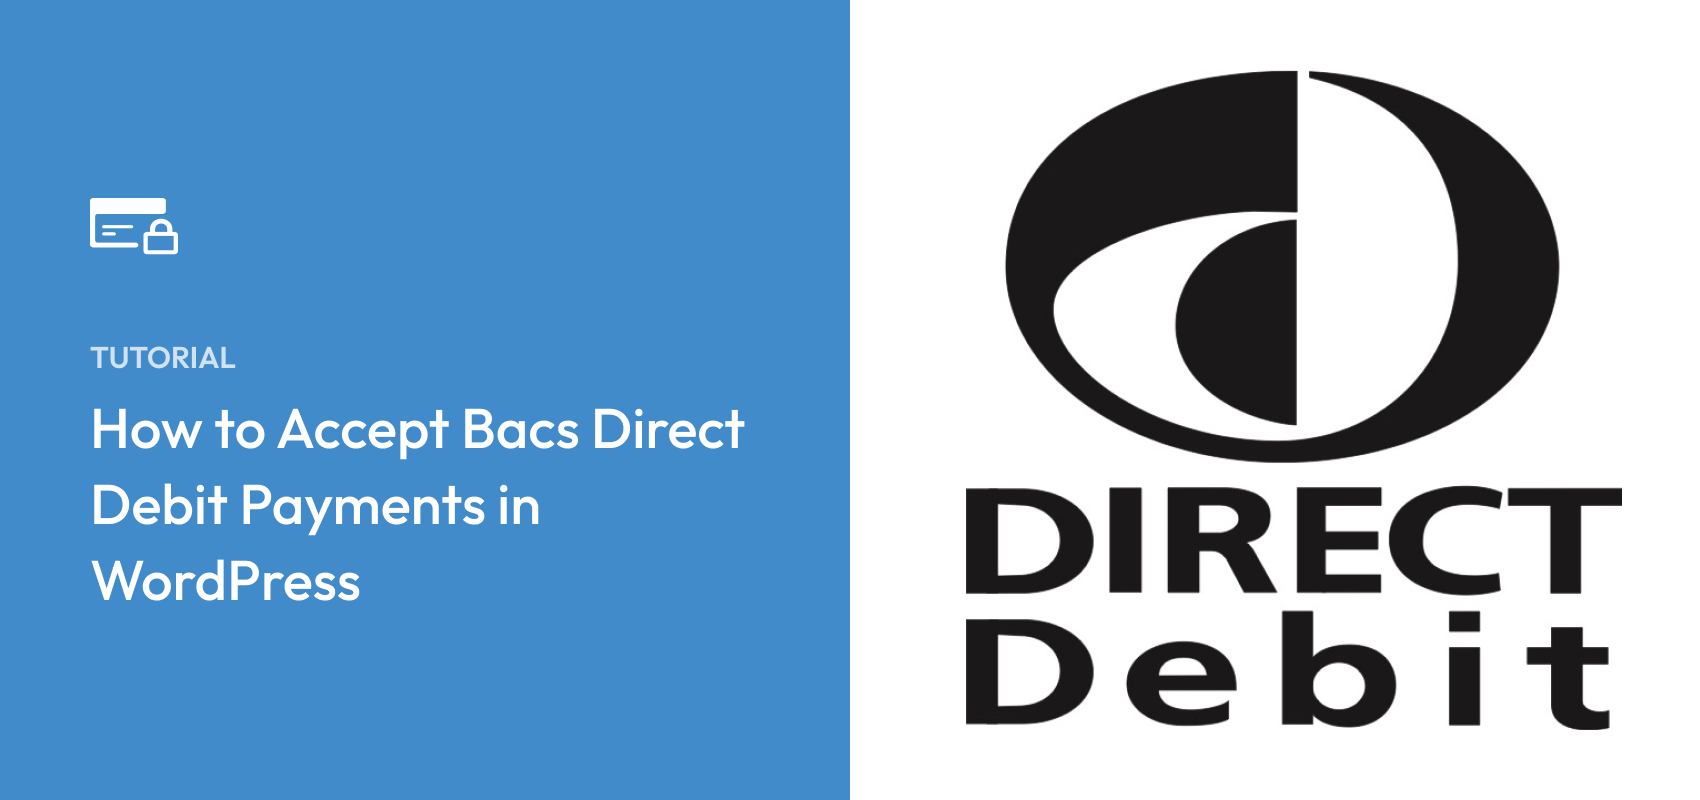 How to Accept Bacs Direct Debit Payments in WordPress